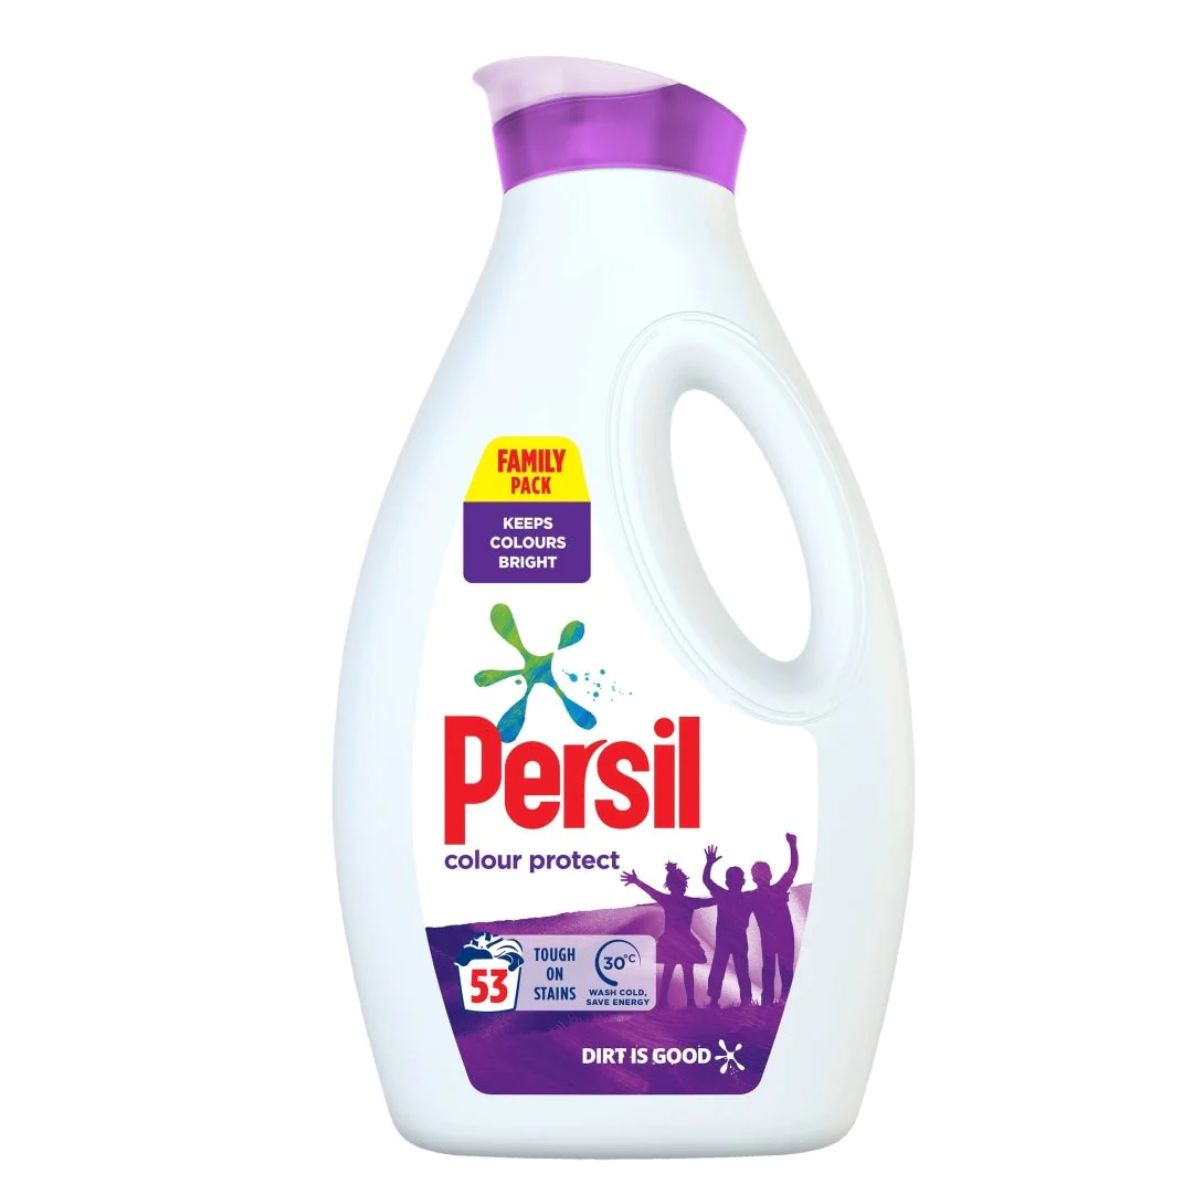 A bottle of Persil Liquid Colour 53 laundry detergent on a white background.